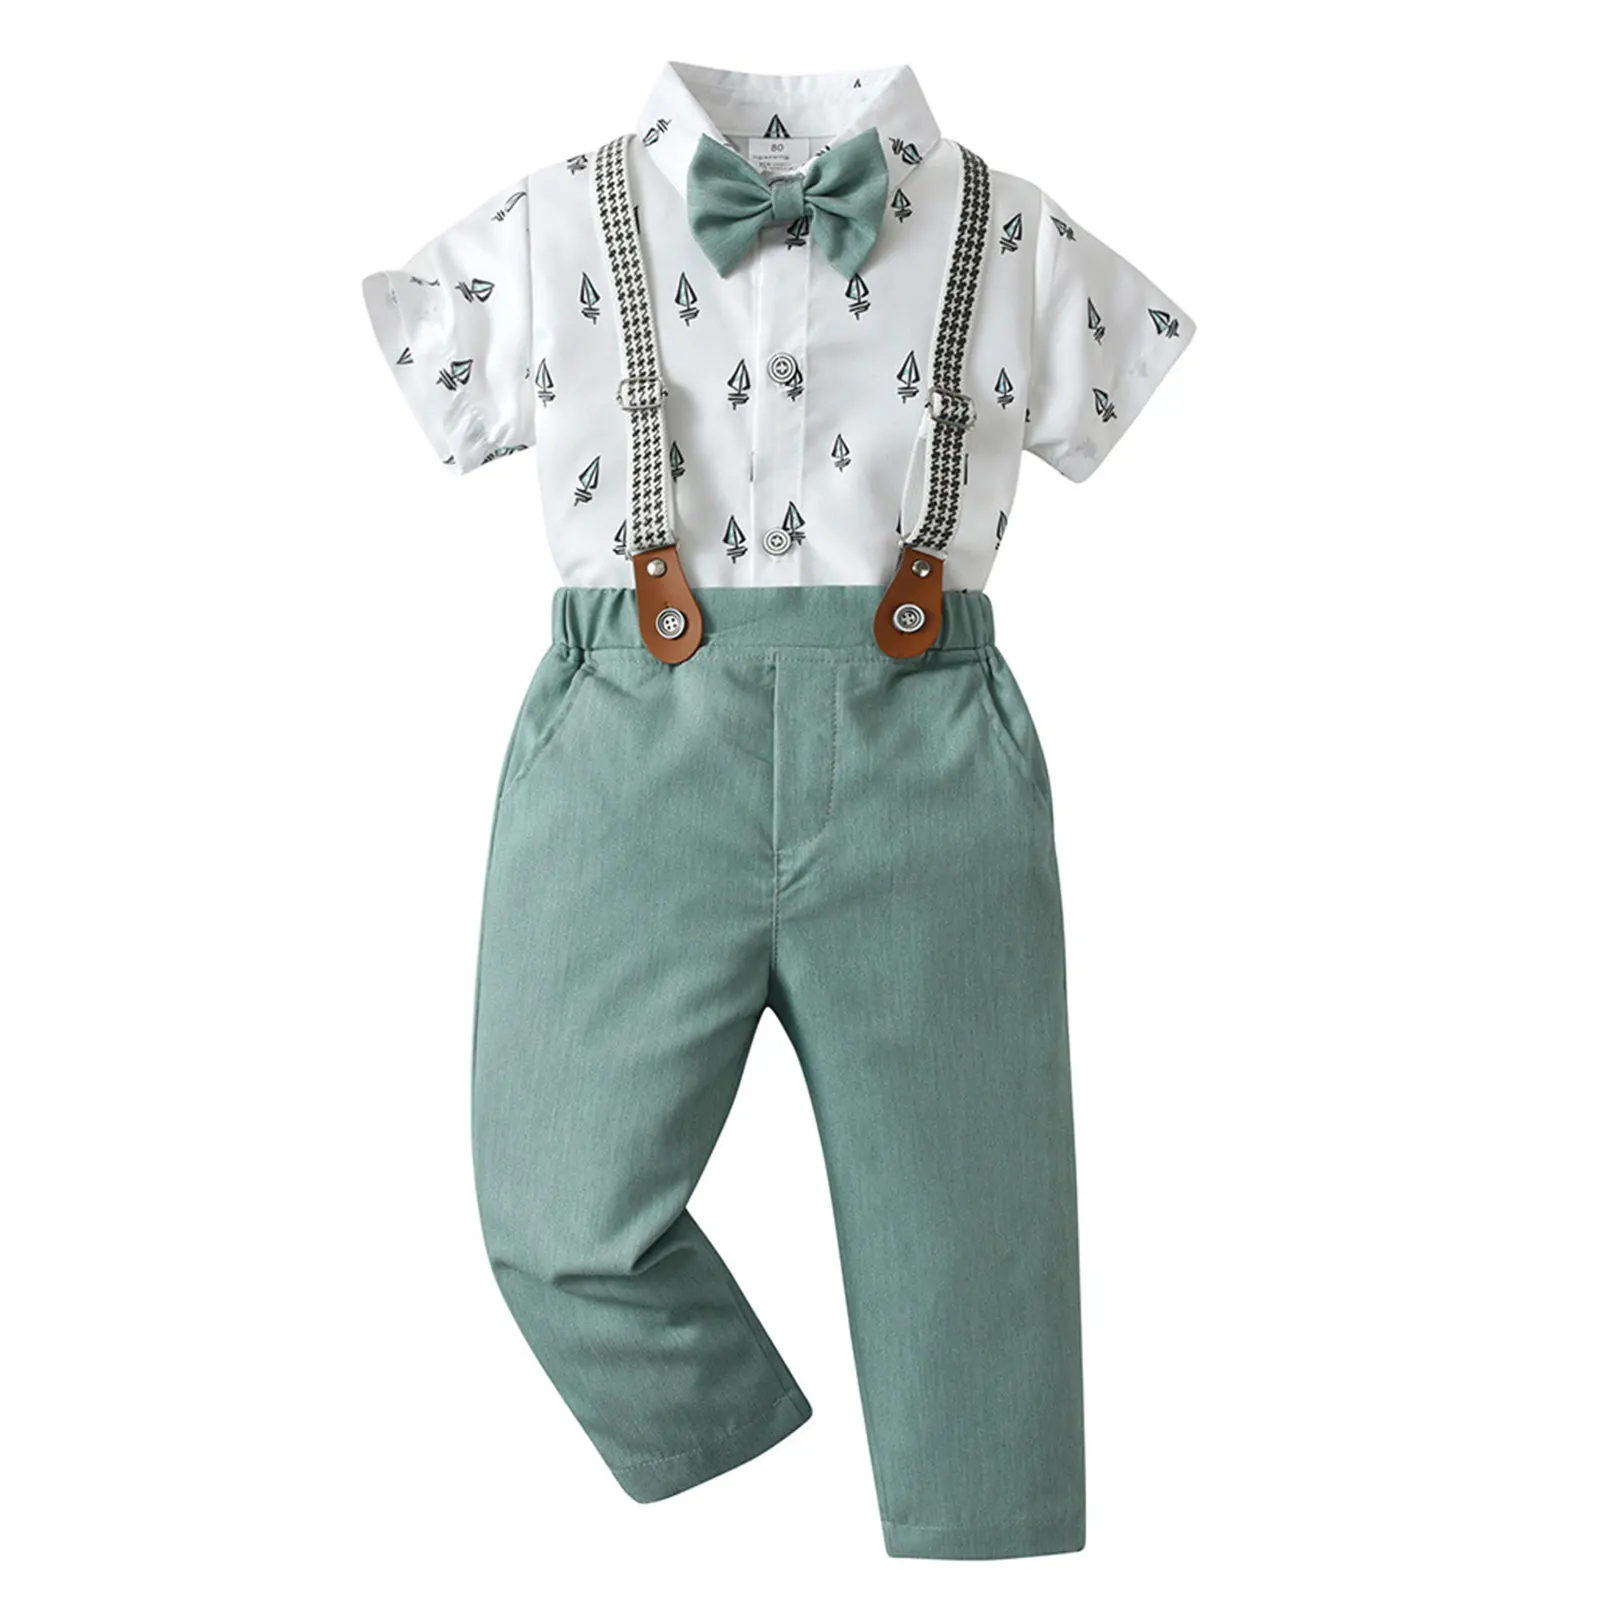 

3Pcs Baby Boys Cotton Summer Clothes Boys Gentleman Suit Short Sleeve Shirt with Bowtie and Suspender Pants Set Party Outfit